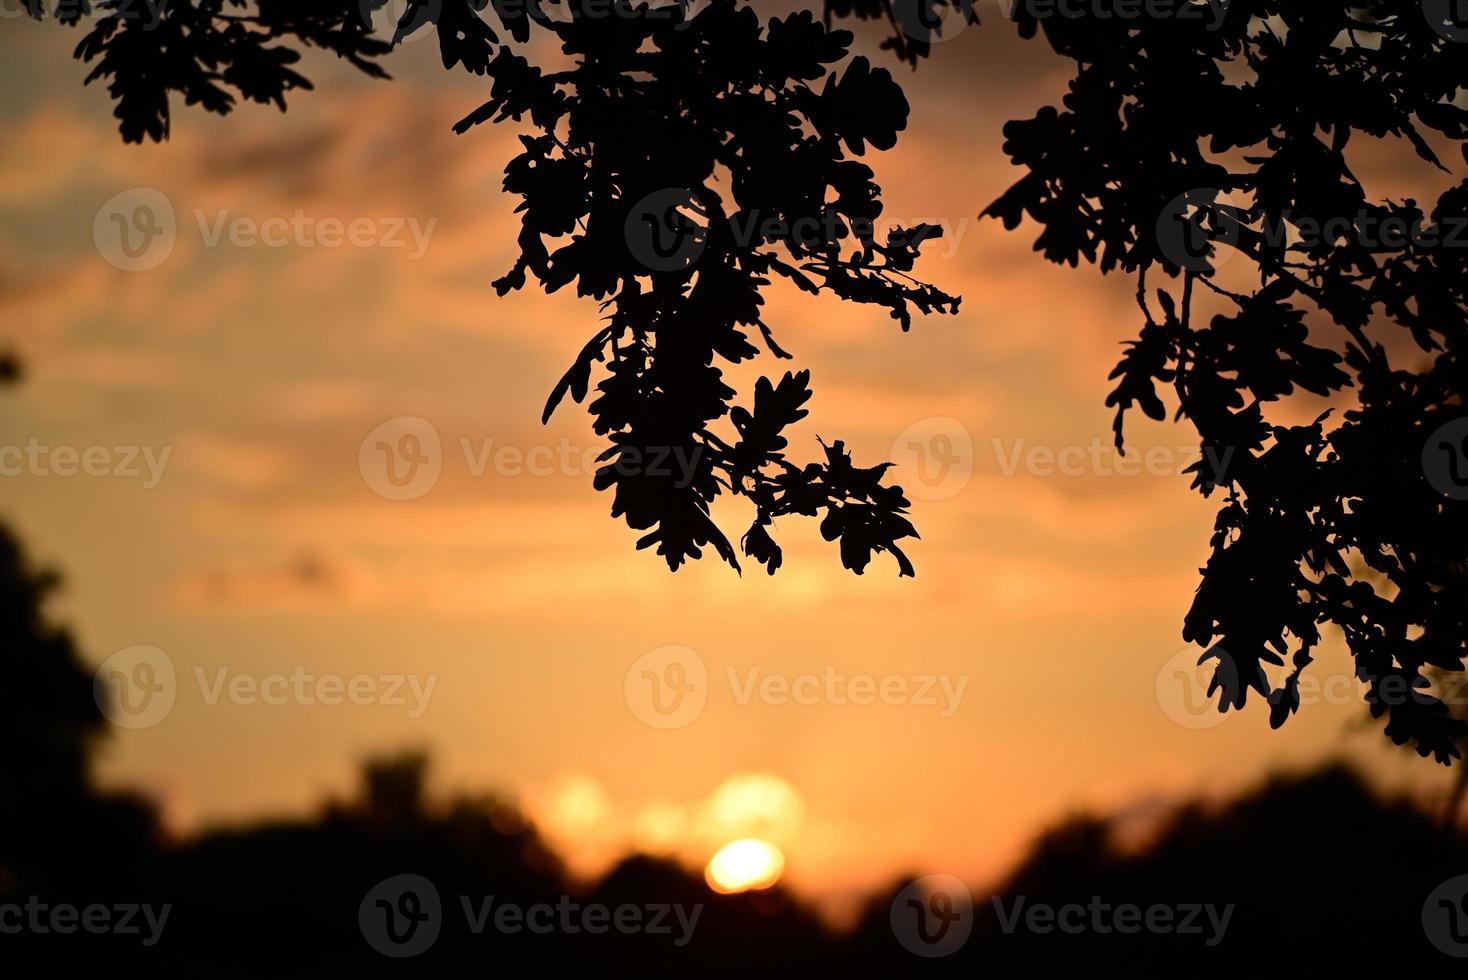 Colourful dramatic sky with an oakbranch in the foreground during sunset photo